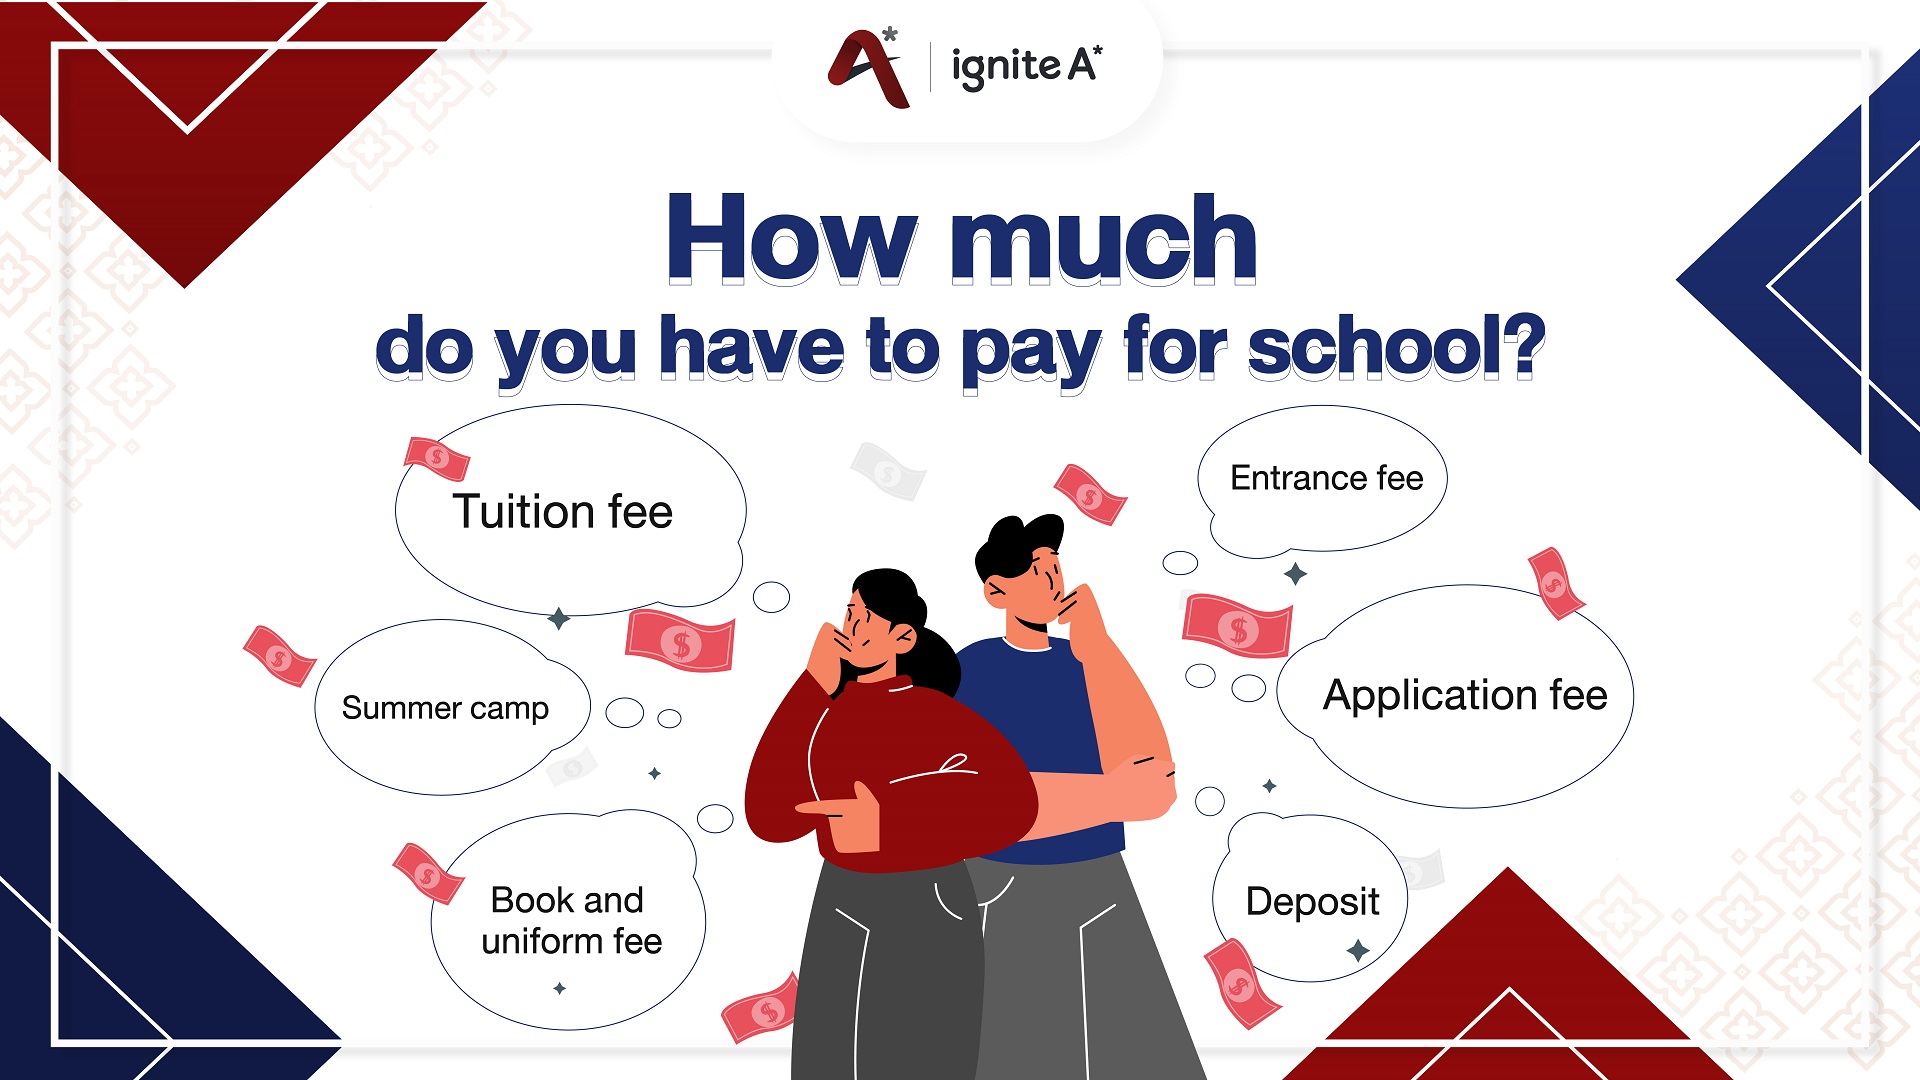 How do you have to pay for international school in Thailand - ignite a star - Bigcover3